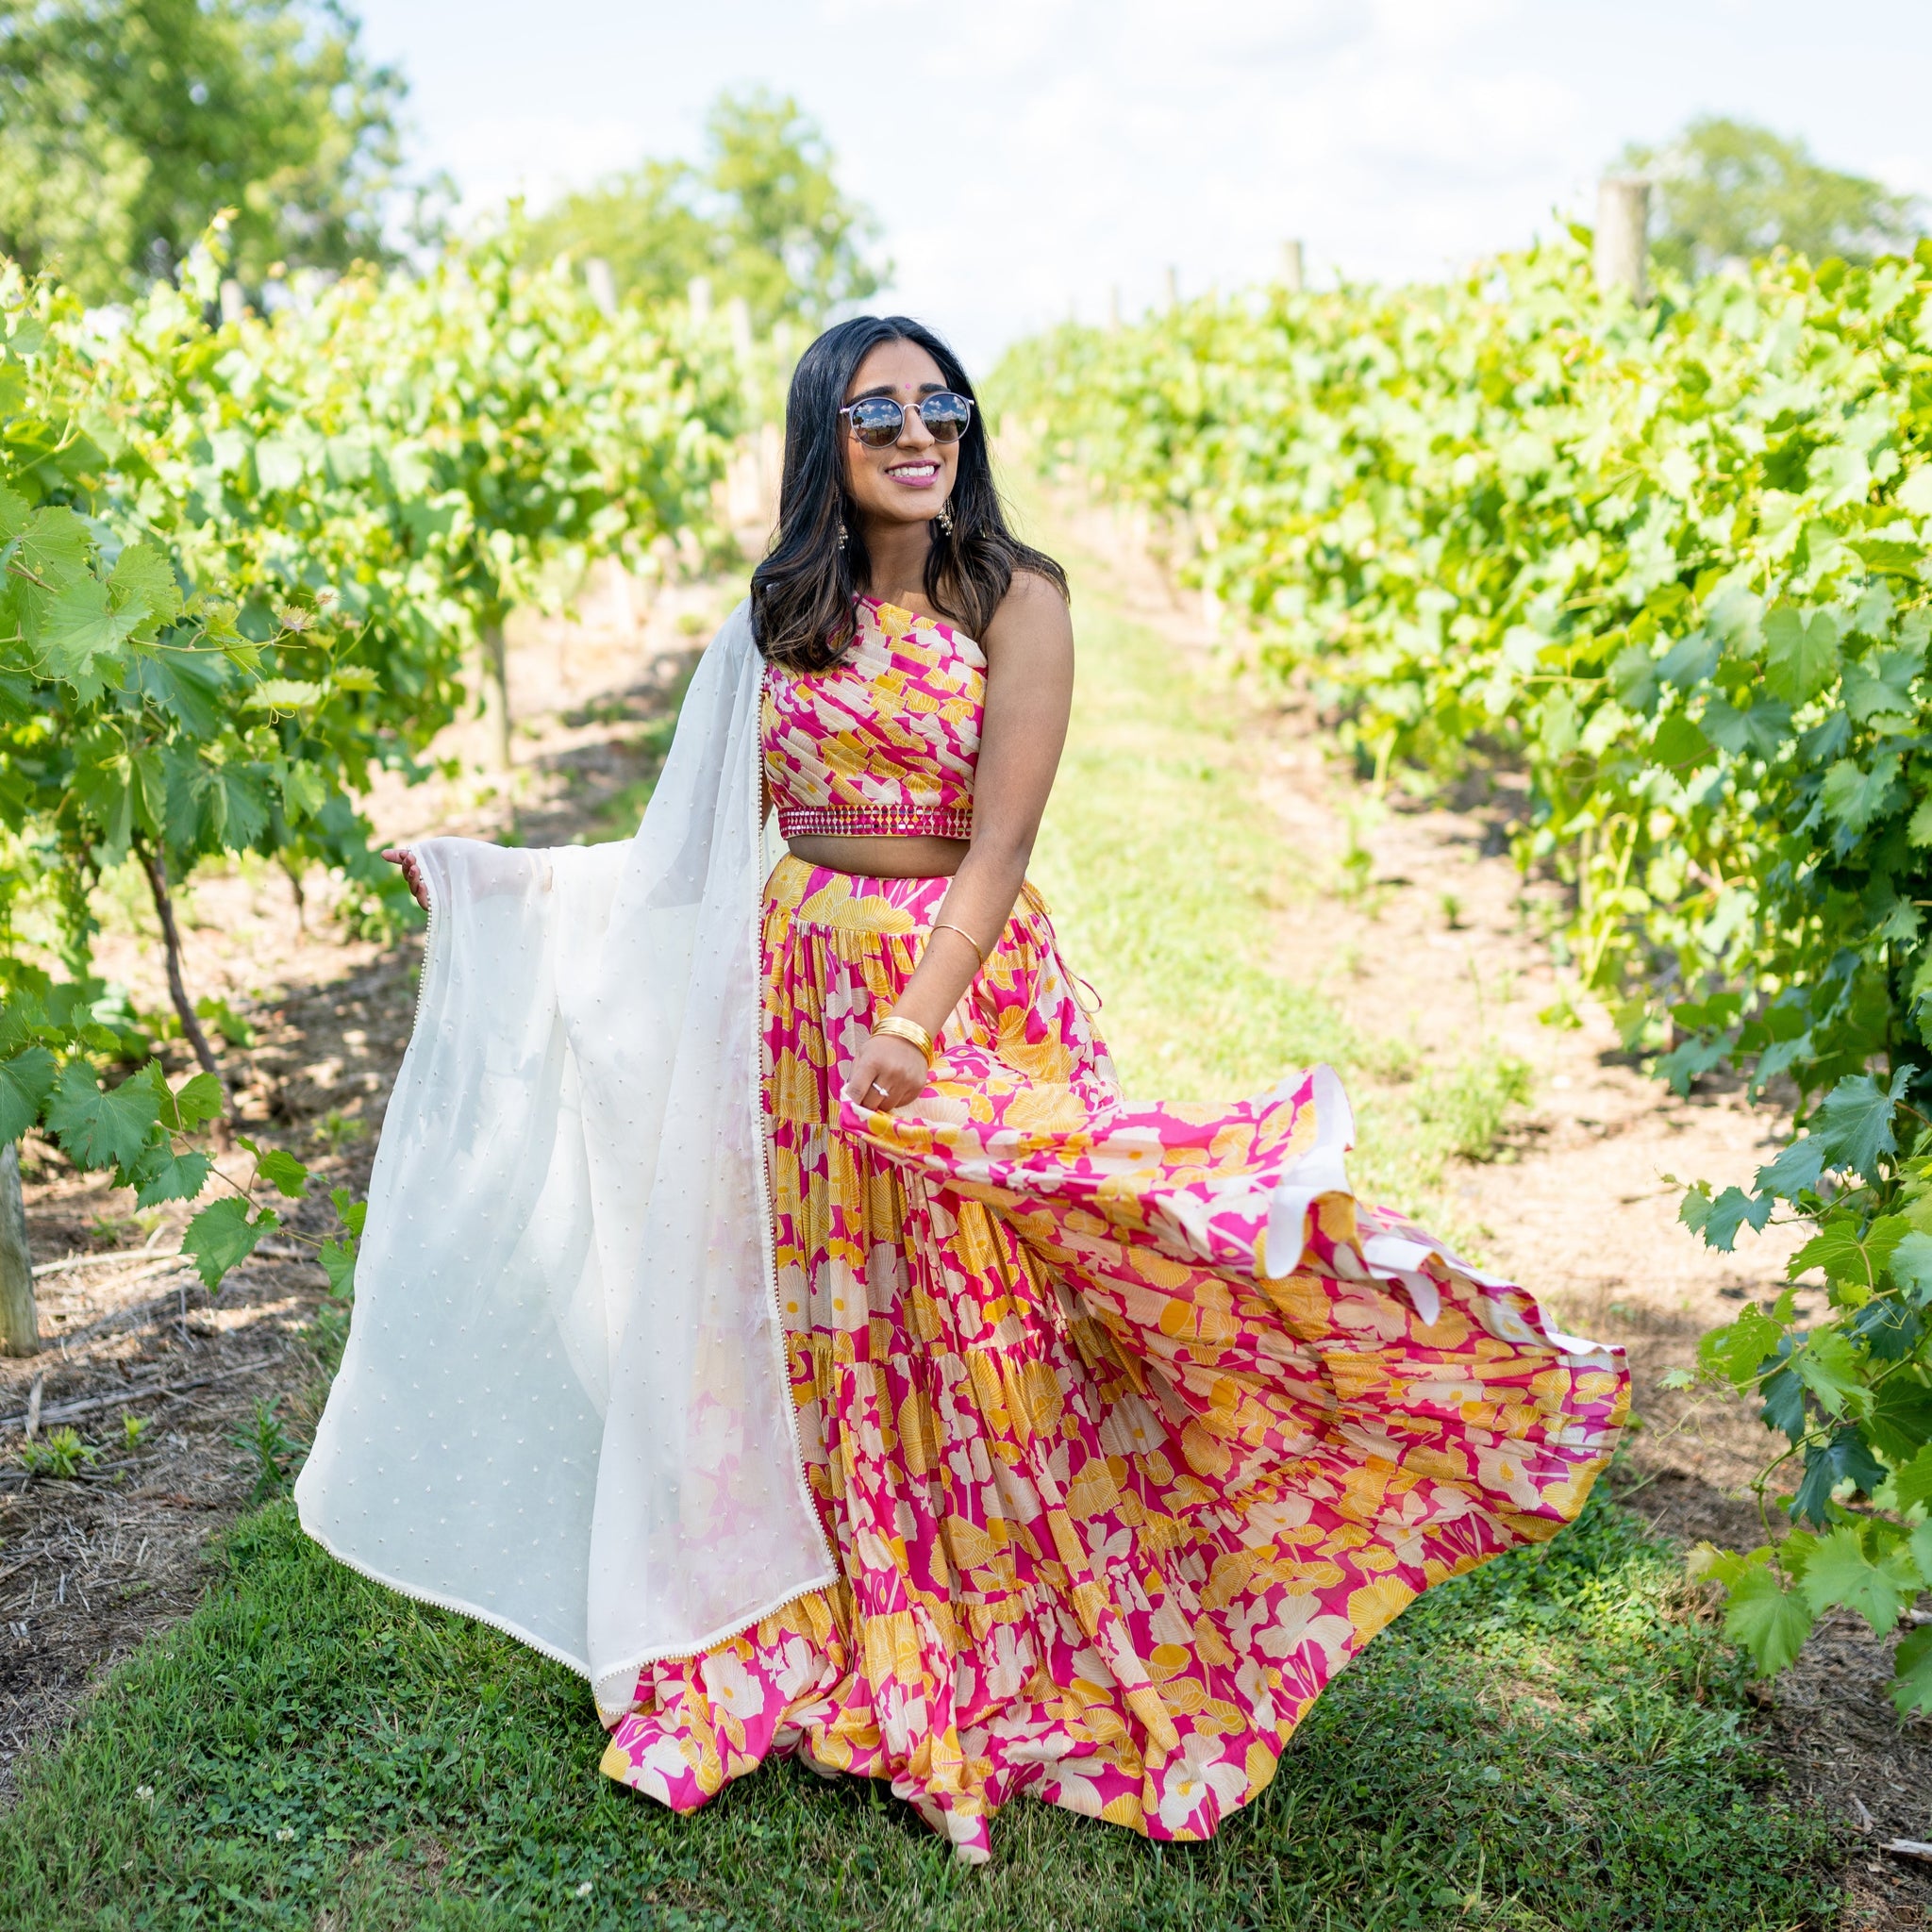 We Loved This Bride's Easy Breezy Style At Her Wedding! | WedMeGood